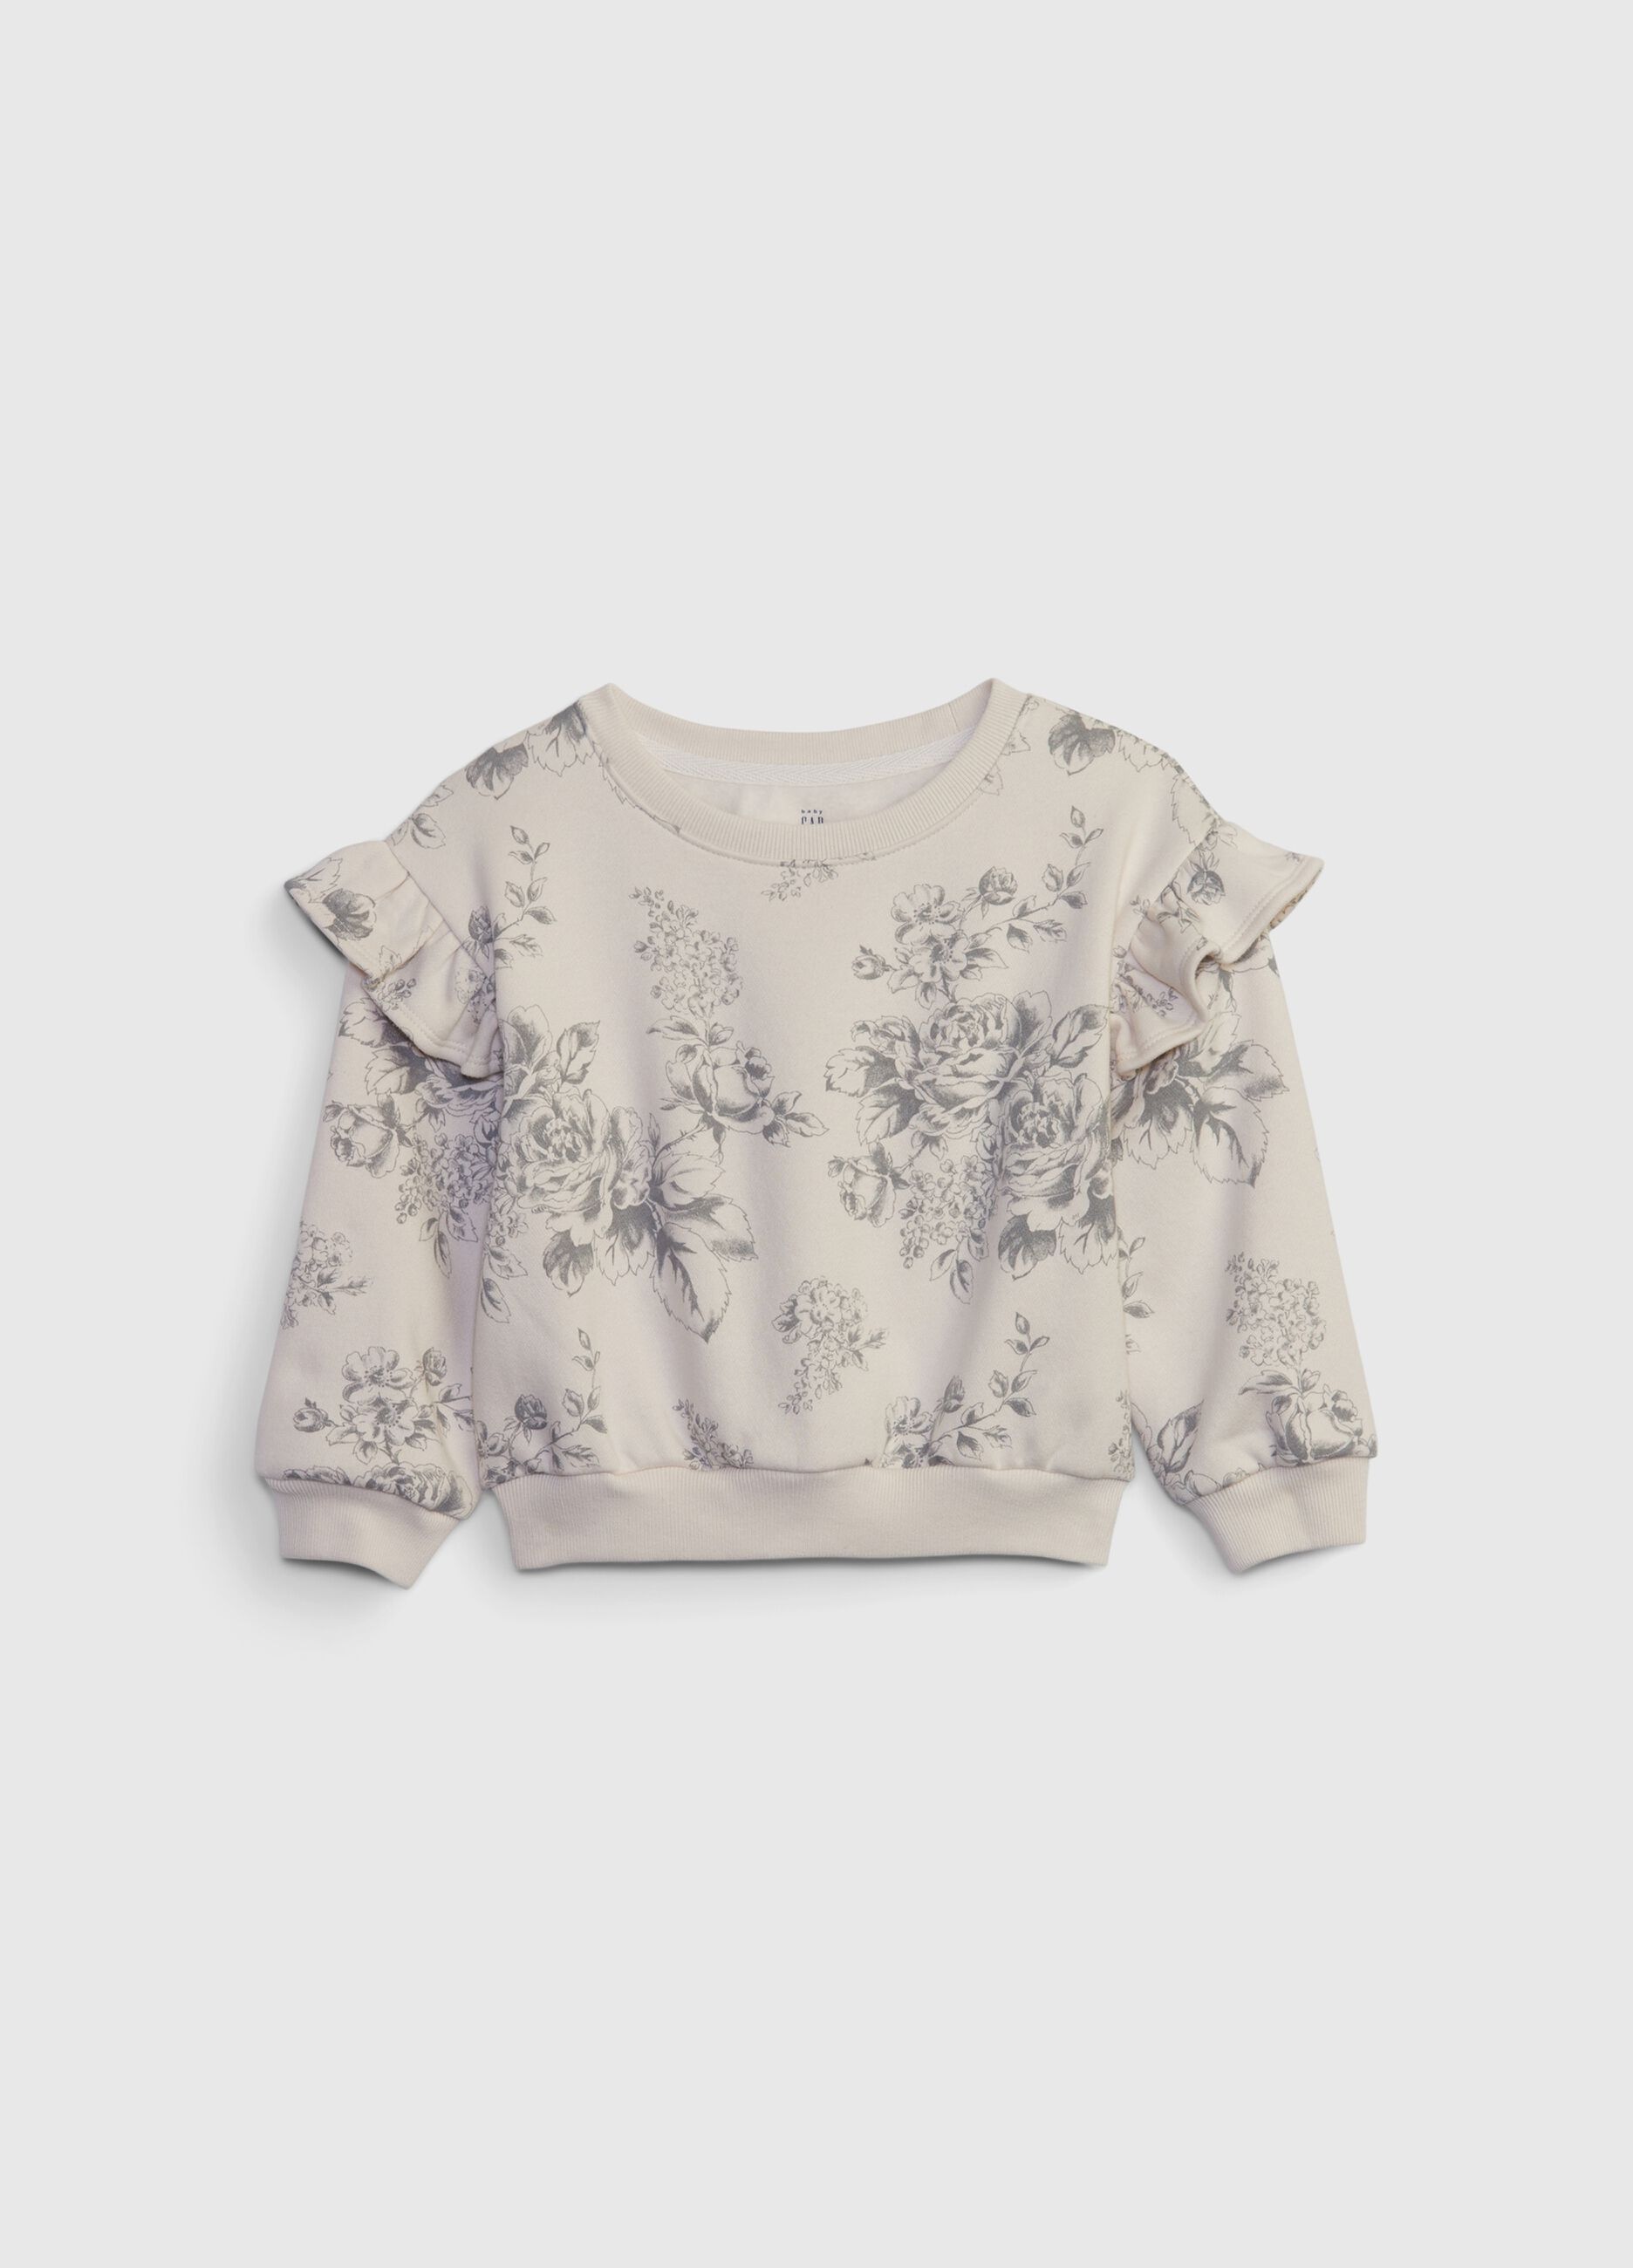 Floral sweatshirt with frills